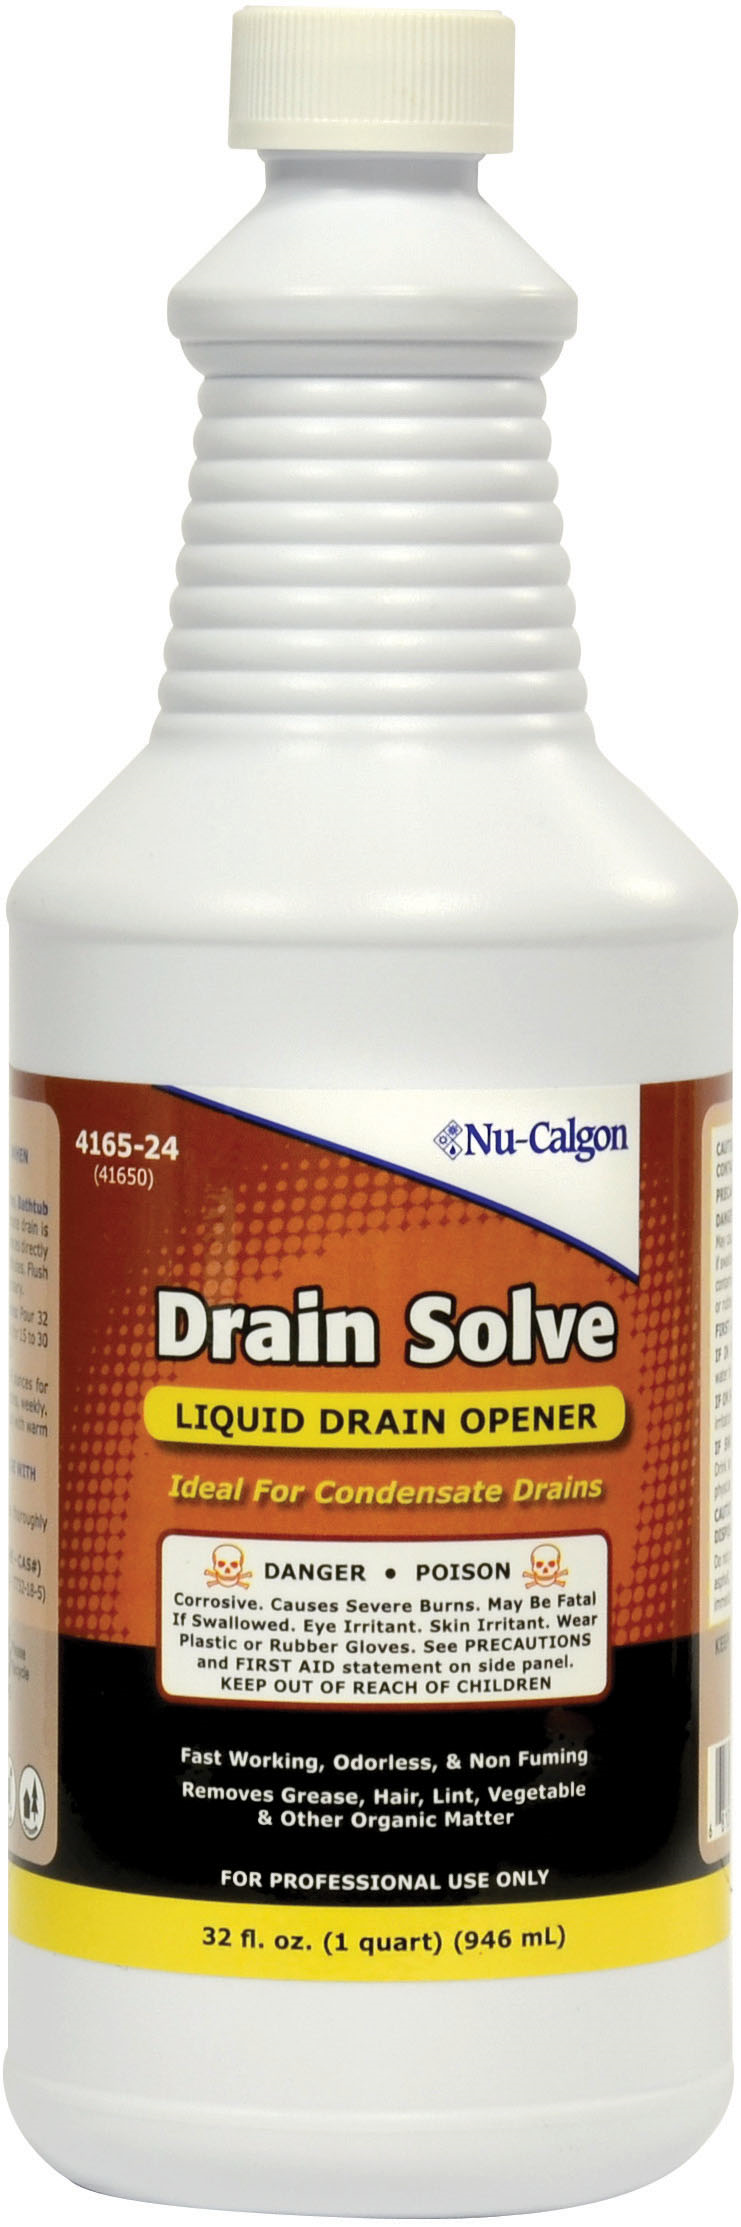 4165-24  DRAIN SOLVE QUART - Plumbing and Pipe Cleaners